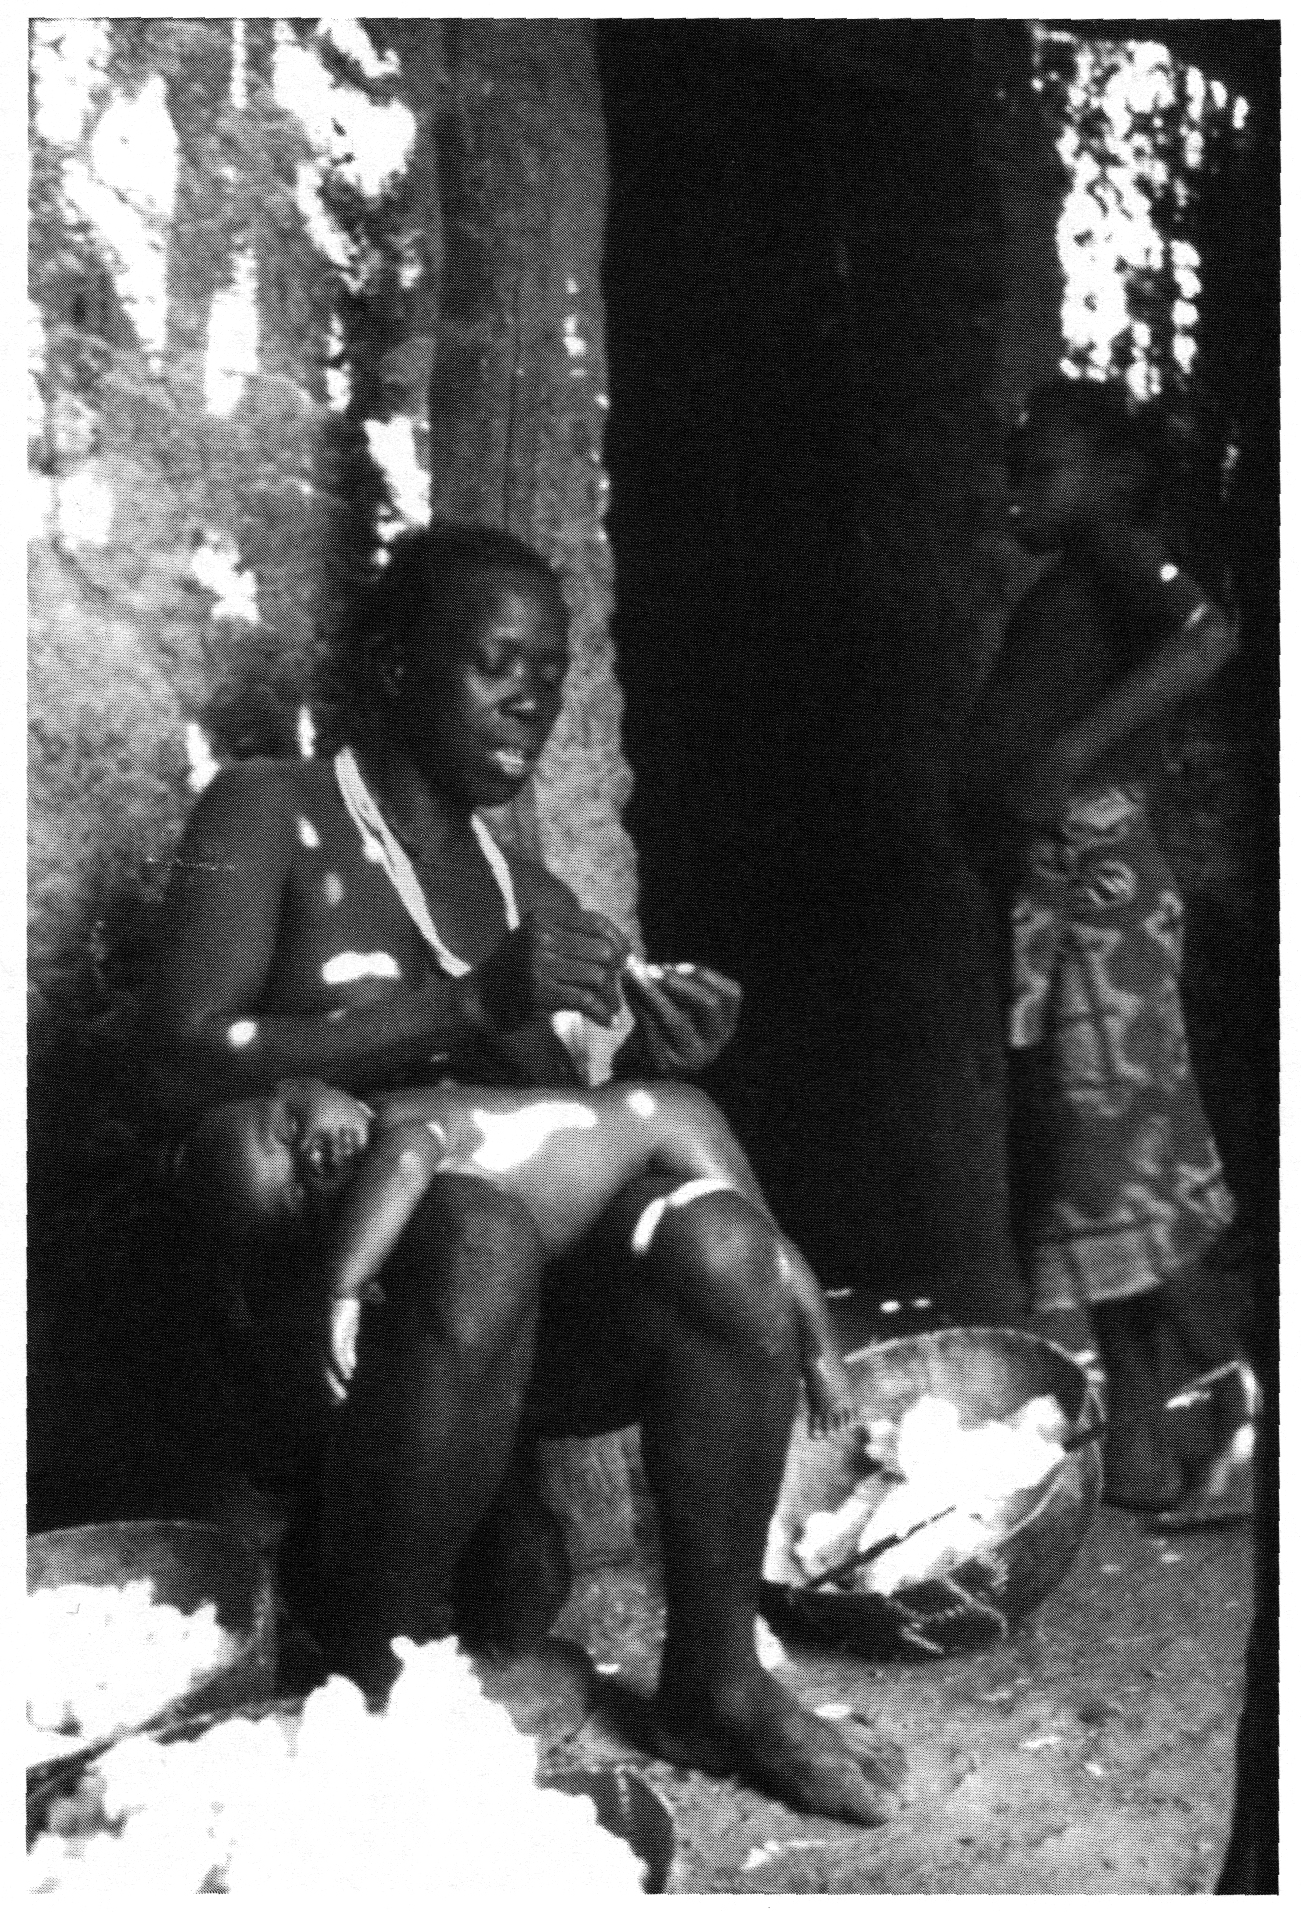 PD - Dogon mother spinning cotton with child on her lap